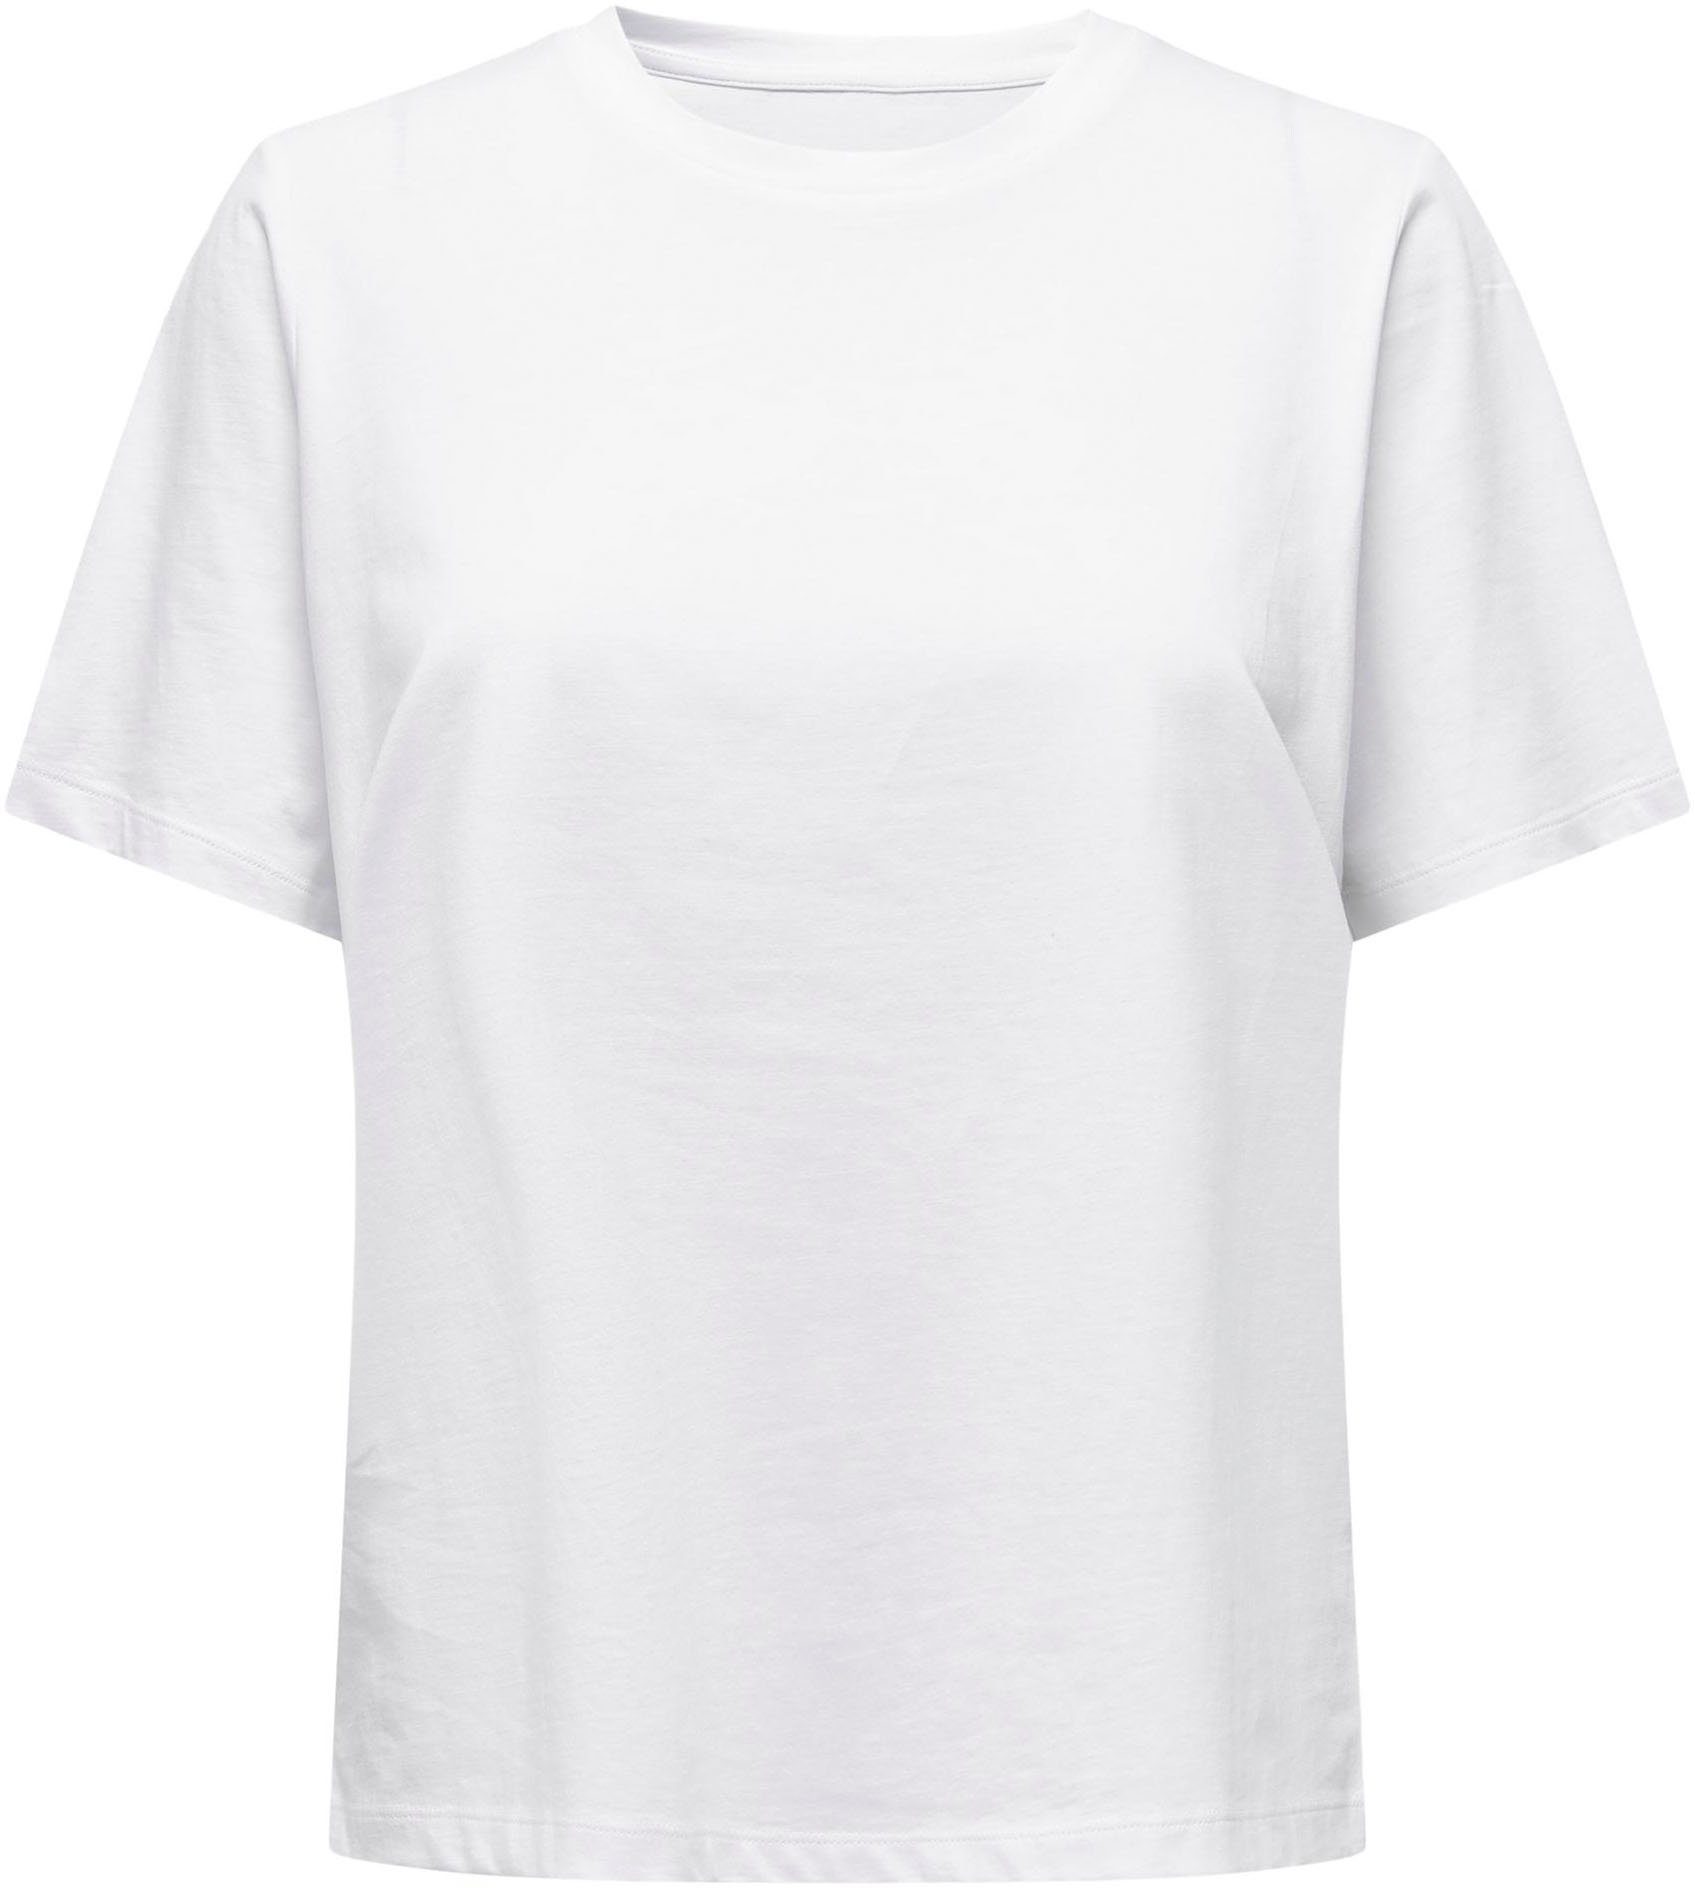 Kurzarmshirt S/S ONLY ONLONLY TEE White NOOS JRS